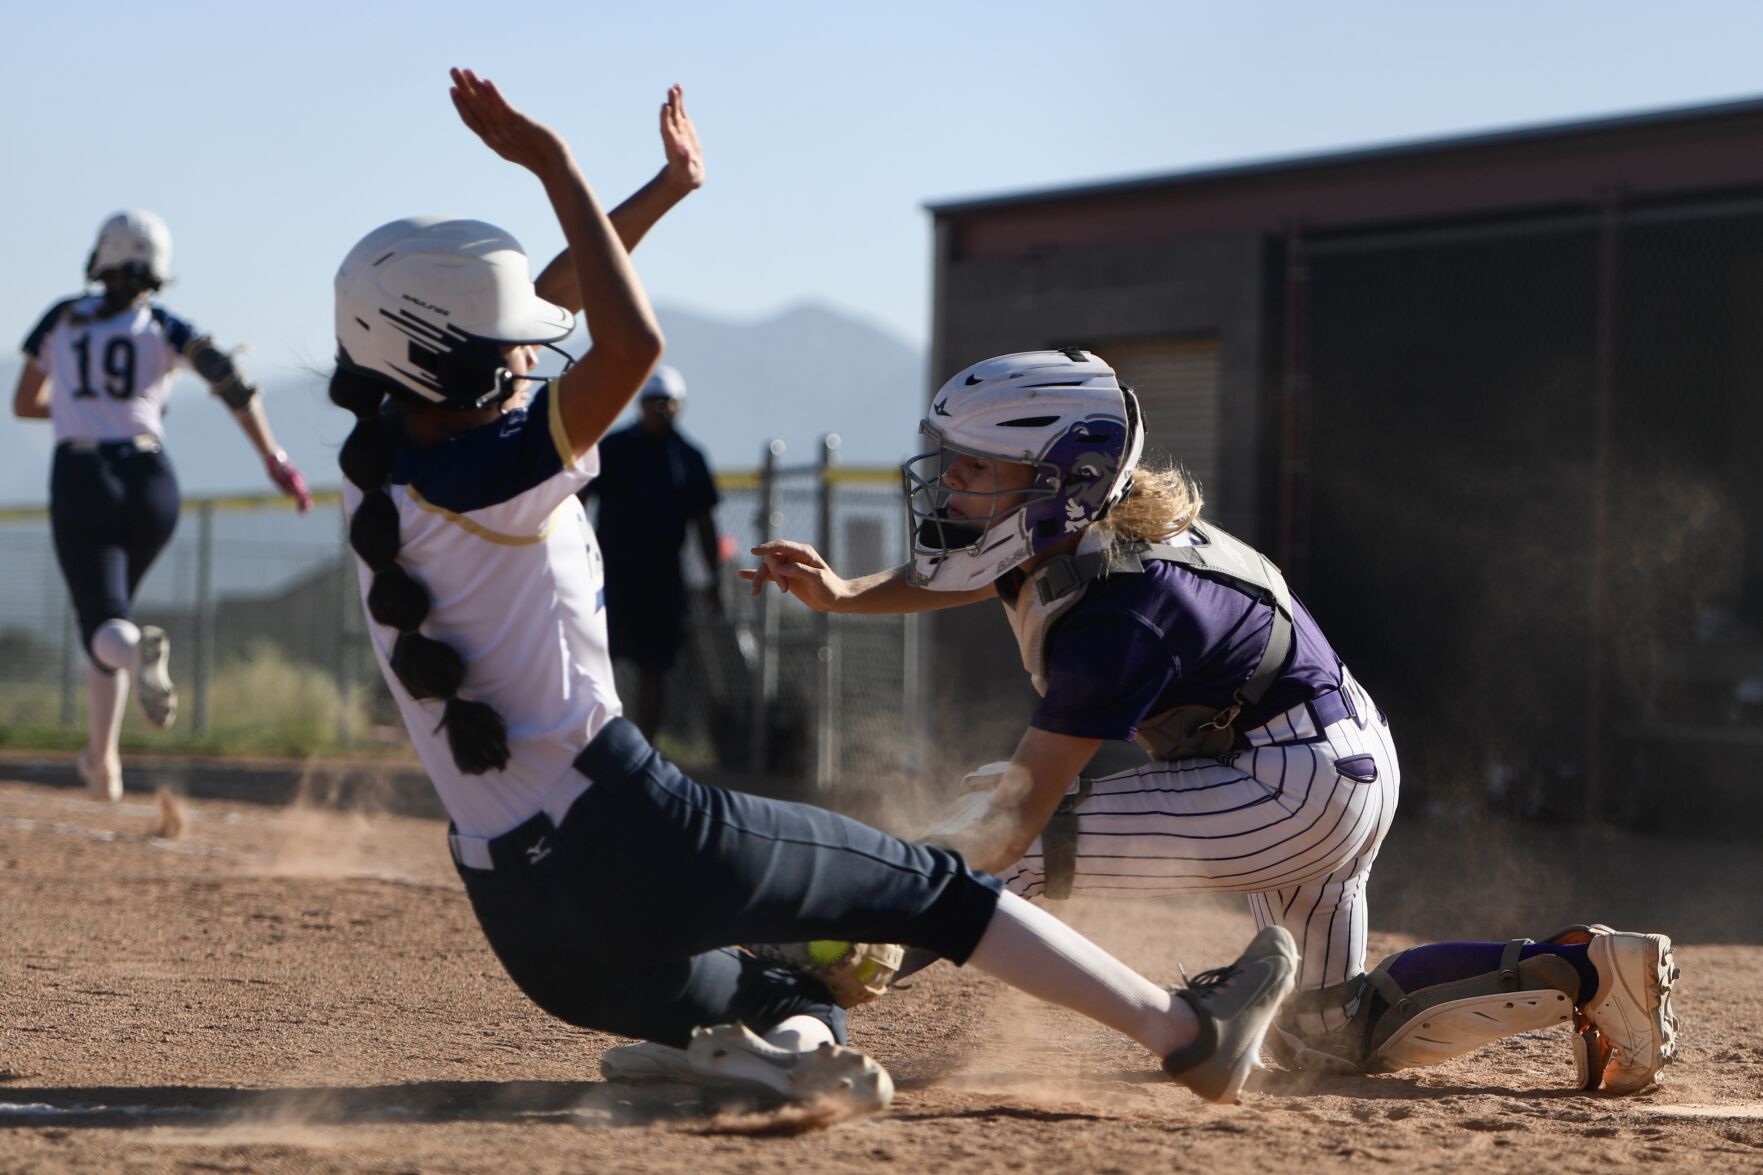 Early deficit too much for Palmer Ridge as Bears fall 13-4 to Lutheran